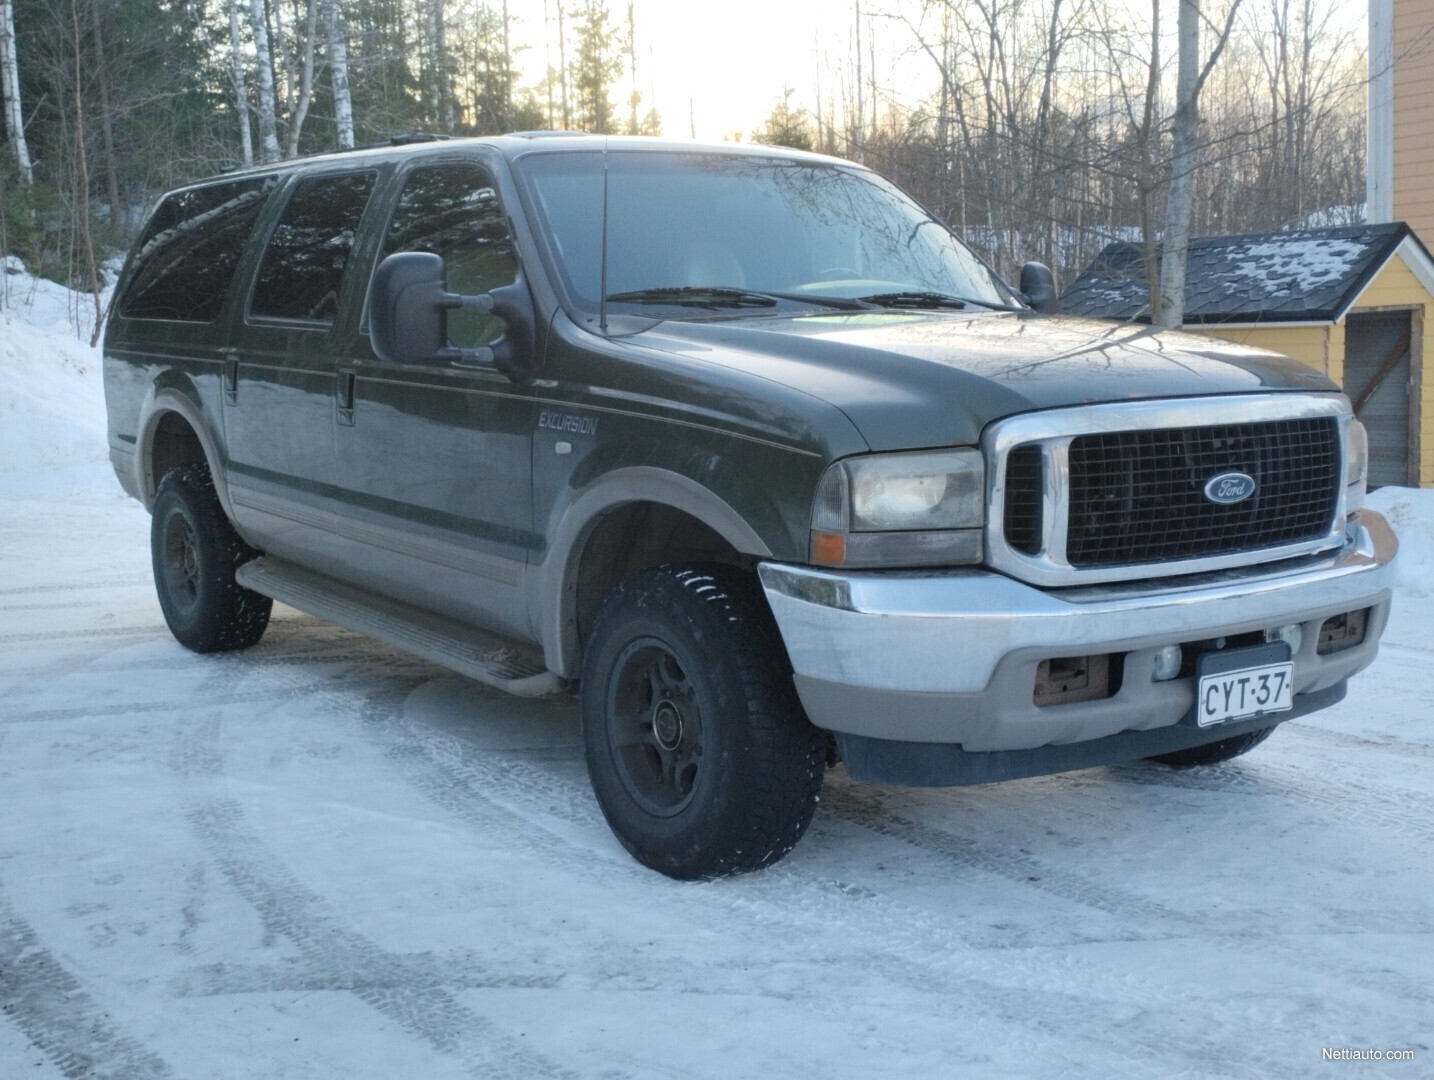 Ford Excursion 7.3 Limited All-terrain SUV 2001 - Used vehicle